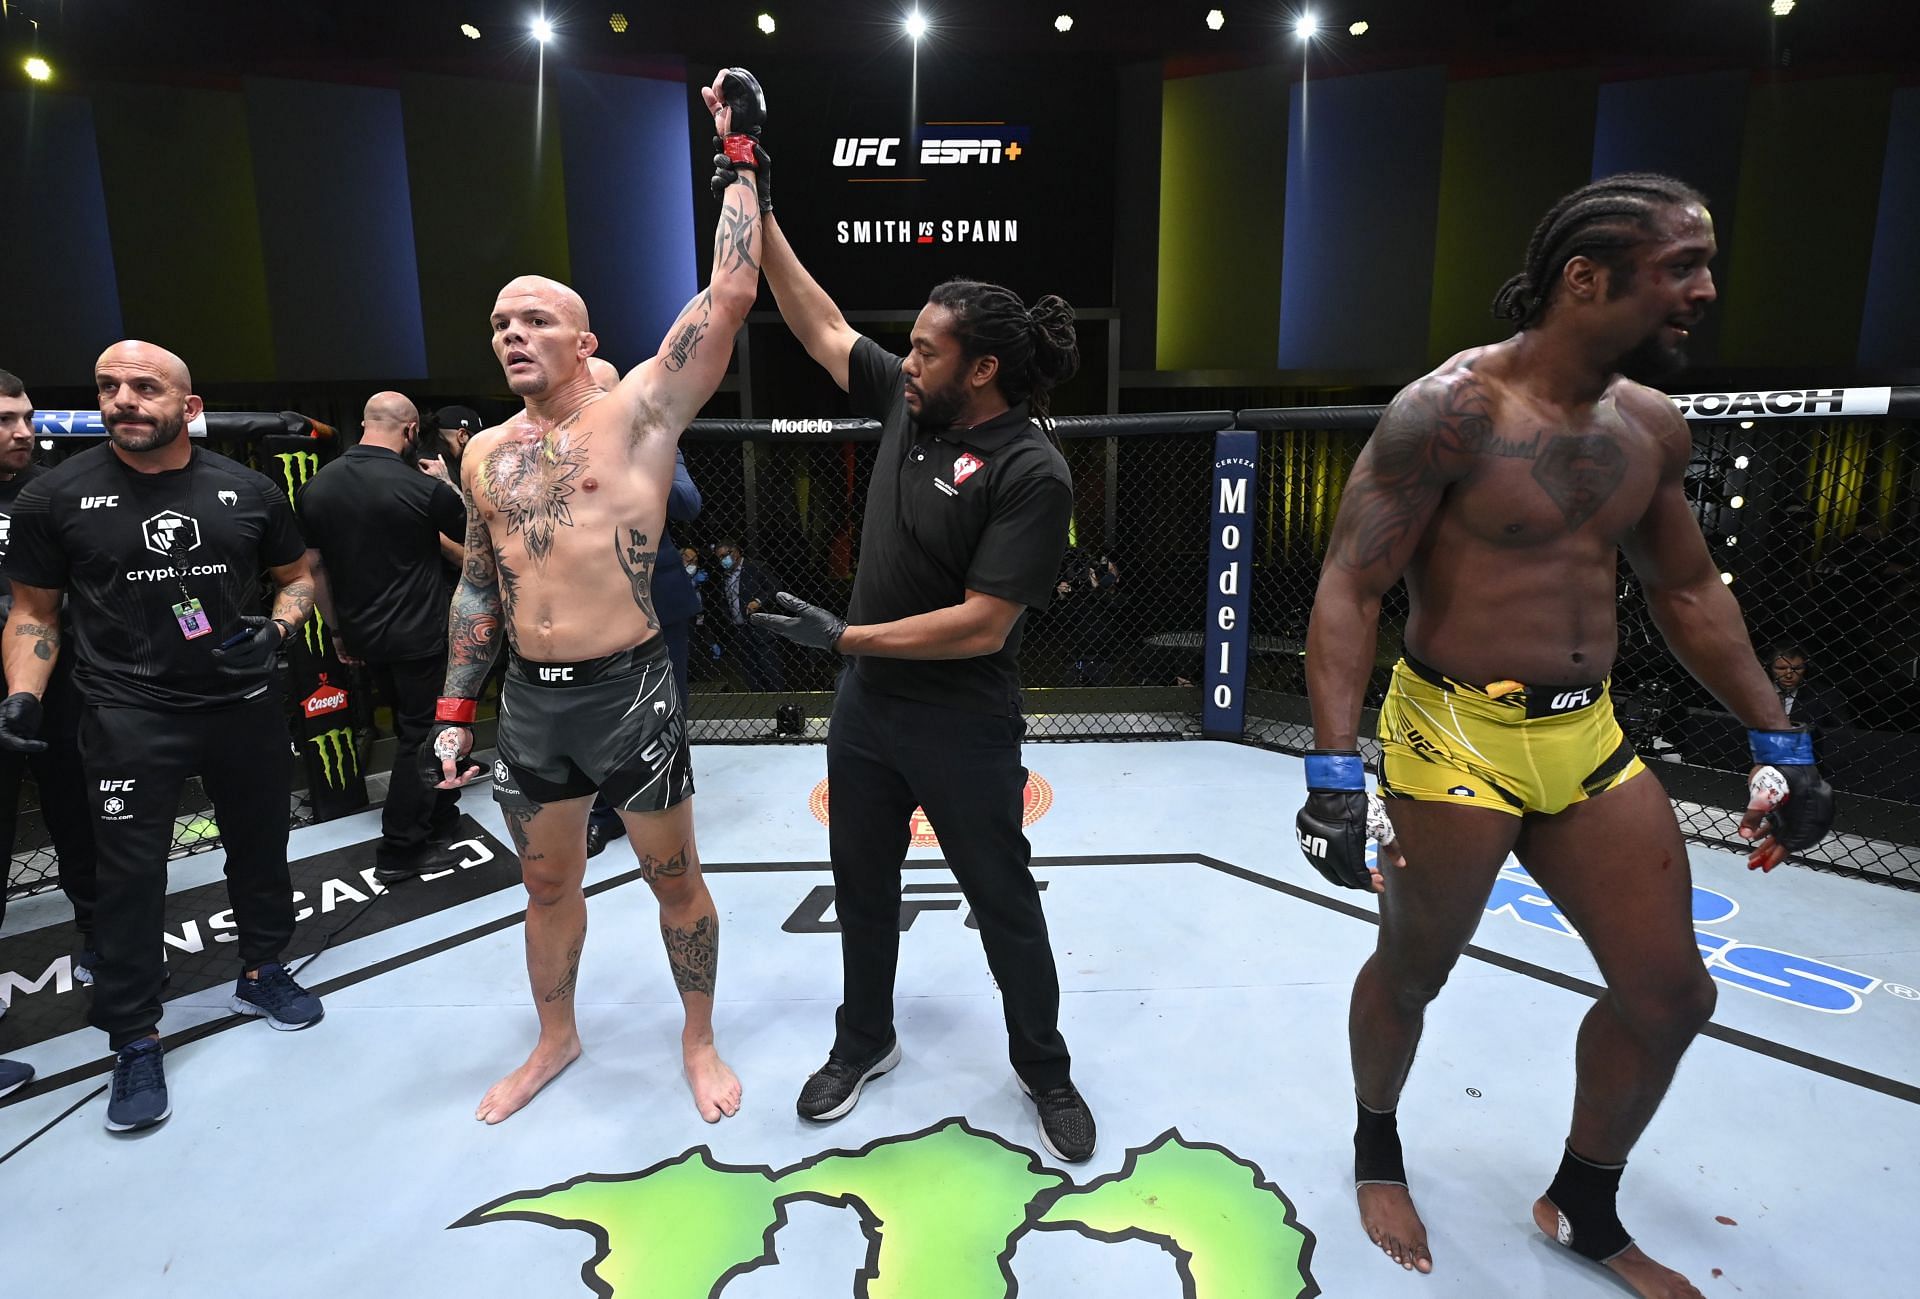 Anthony Smith has gone from being a journeyman to earning respect as a legitimate contender